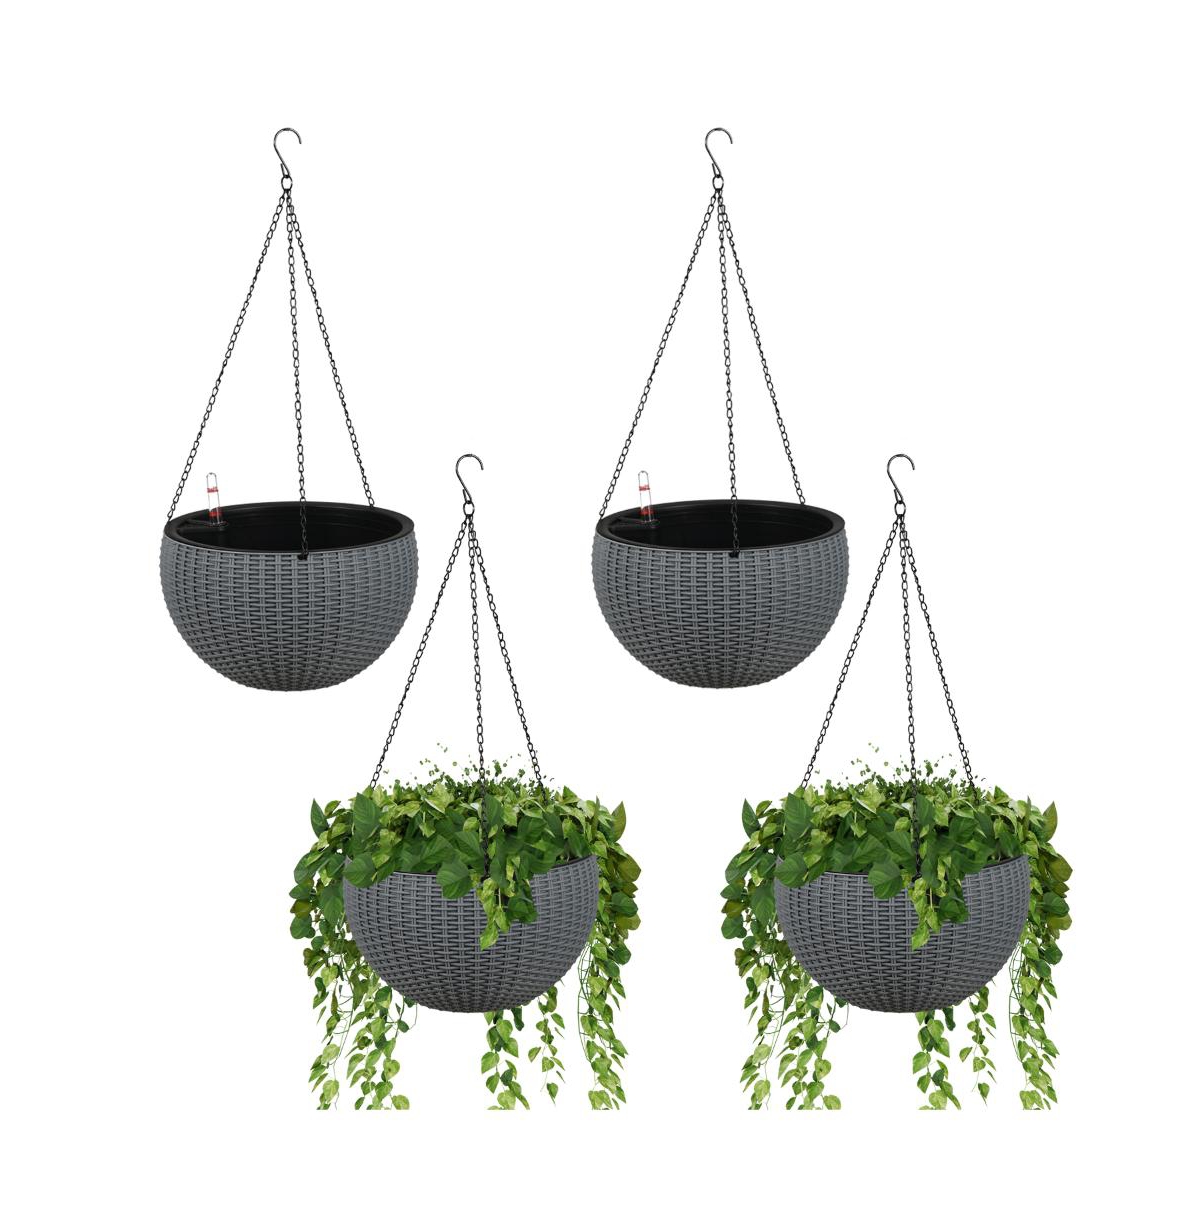 4 Pack Self-Watering Hanging Planters, 10.24'' x 4.72'' x 6.38 '' Dual-pots Design Hanging Baskets - White